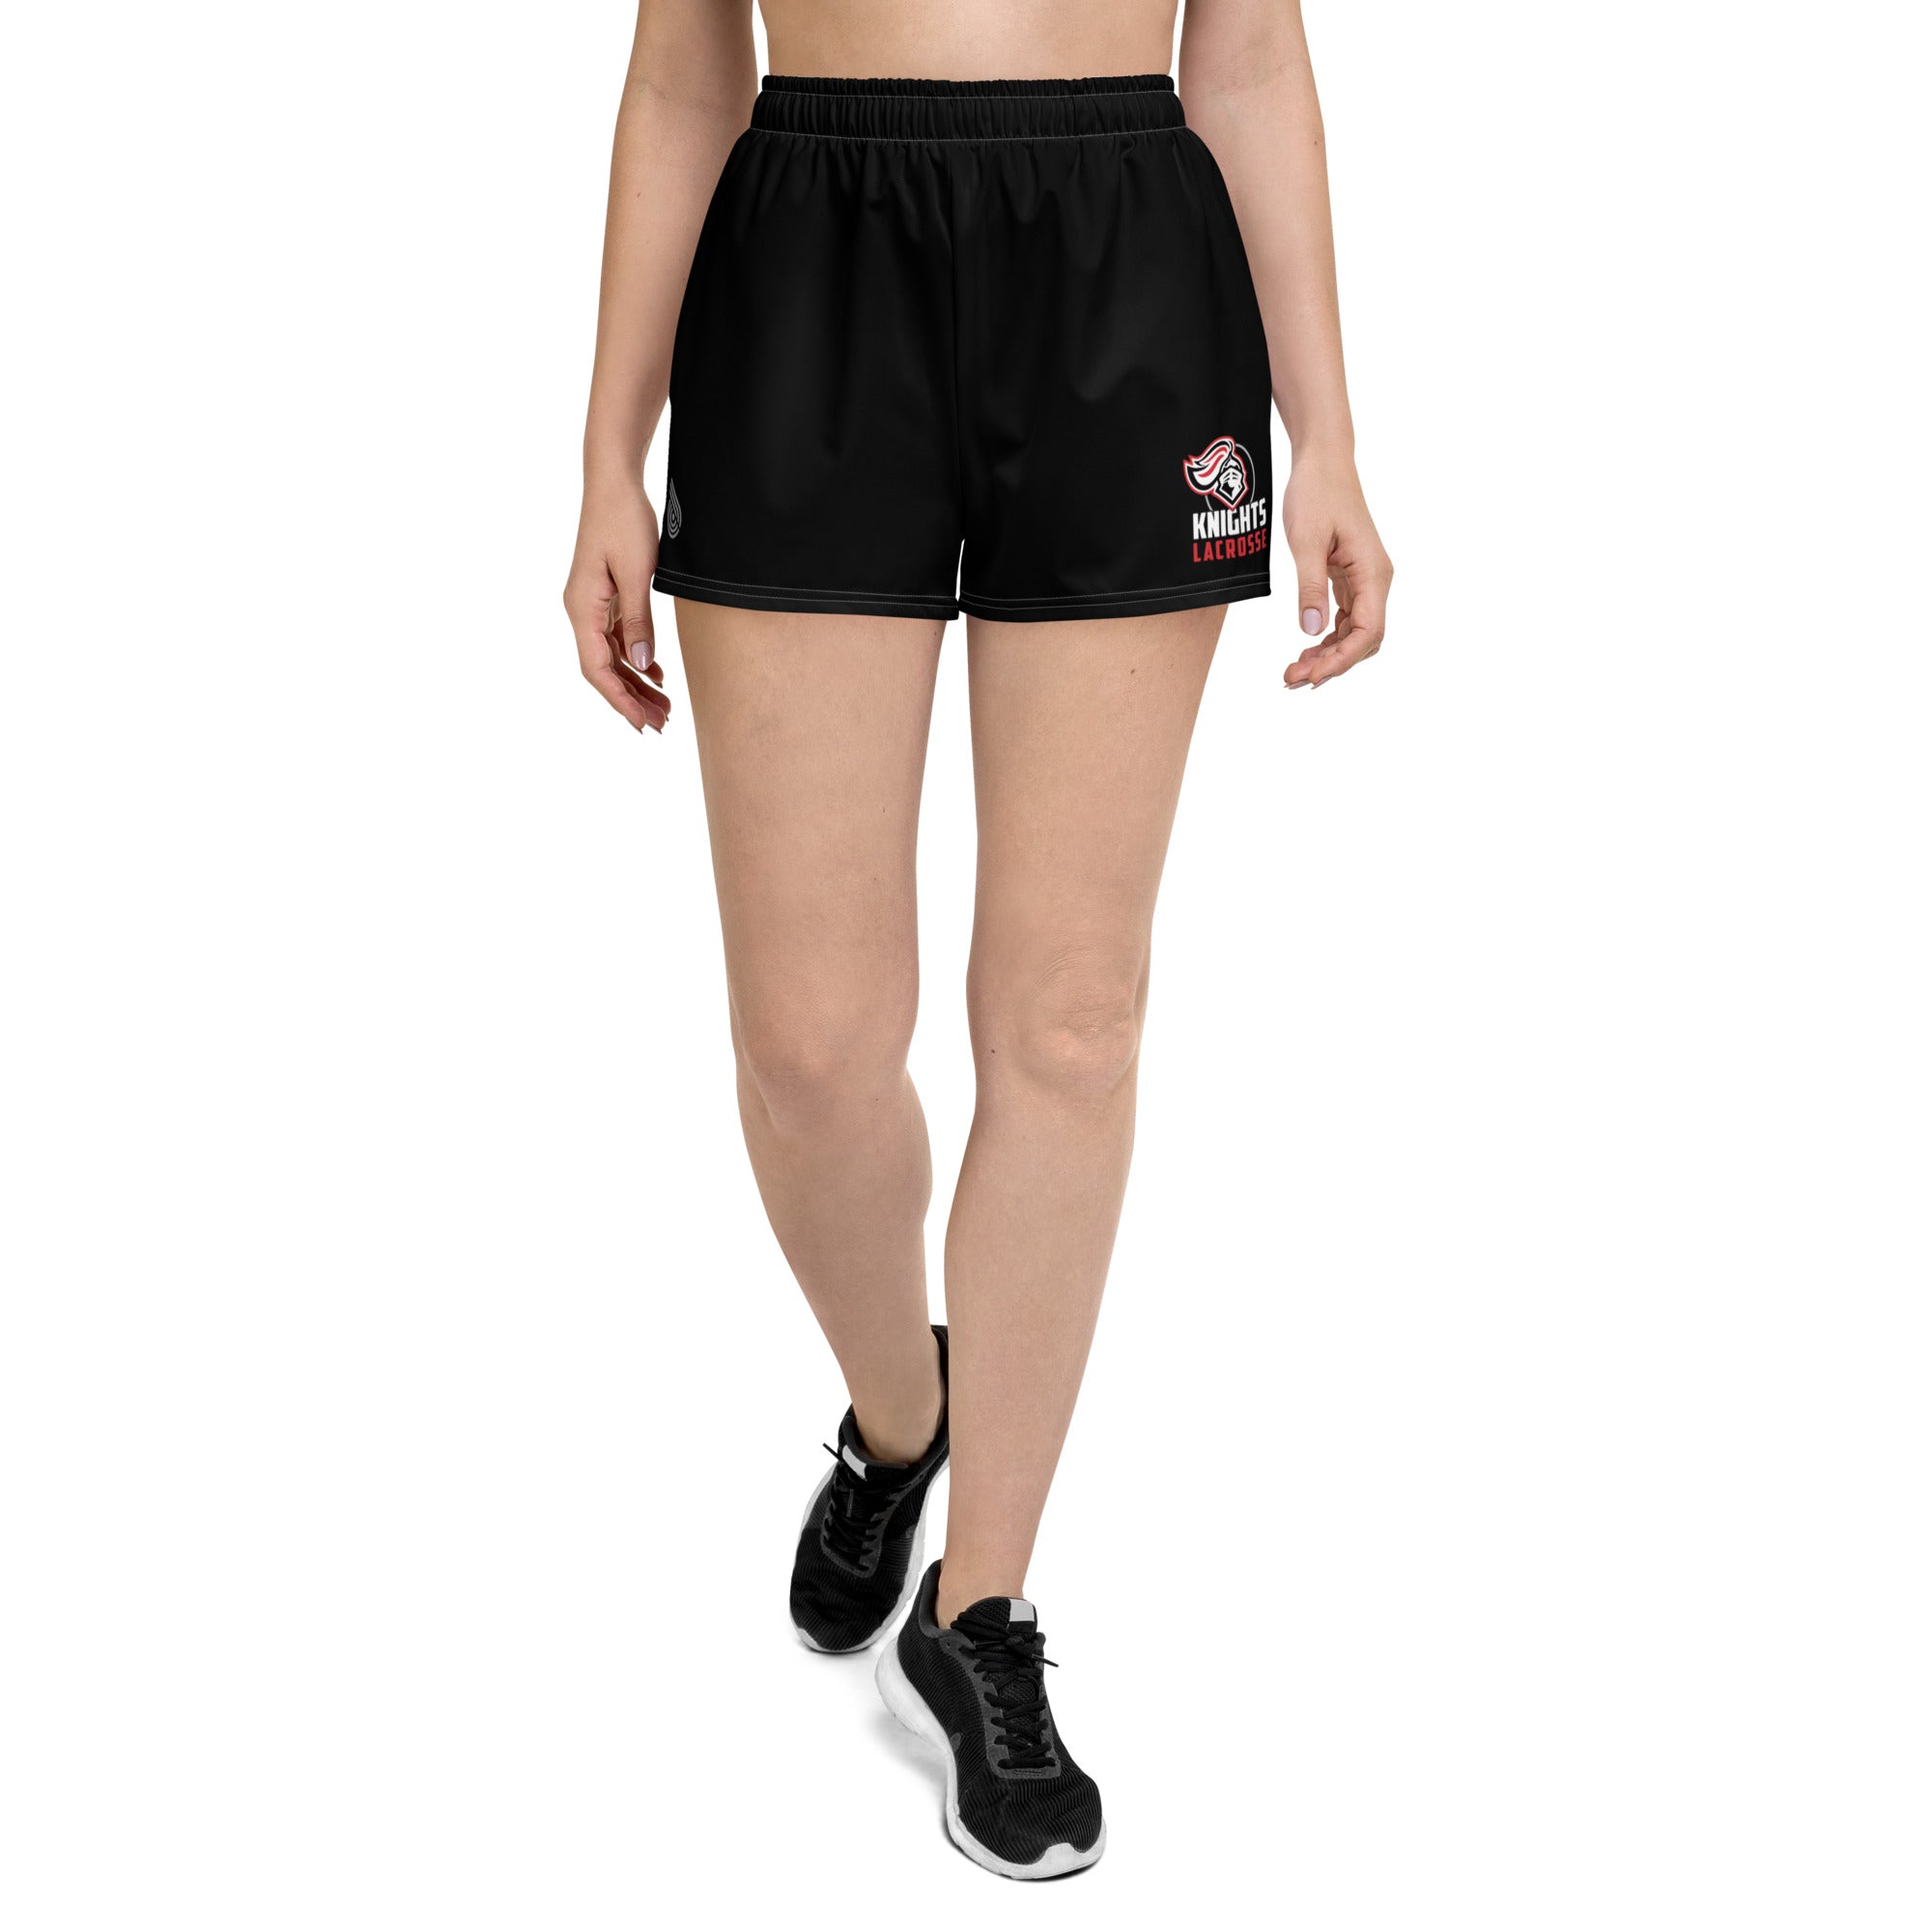 North Andover Women’s Athletic Shorts